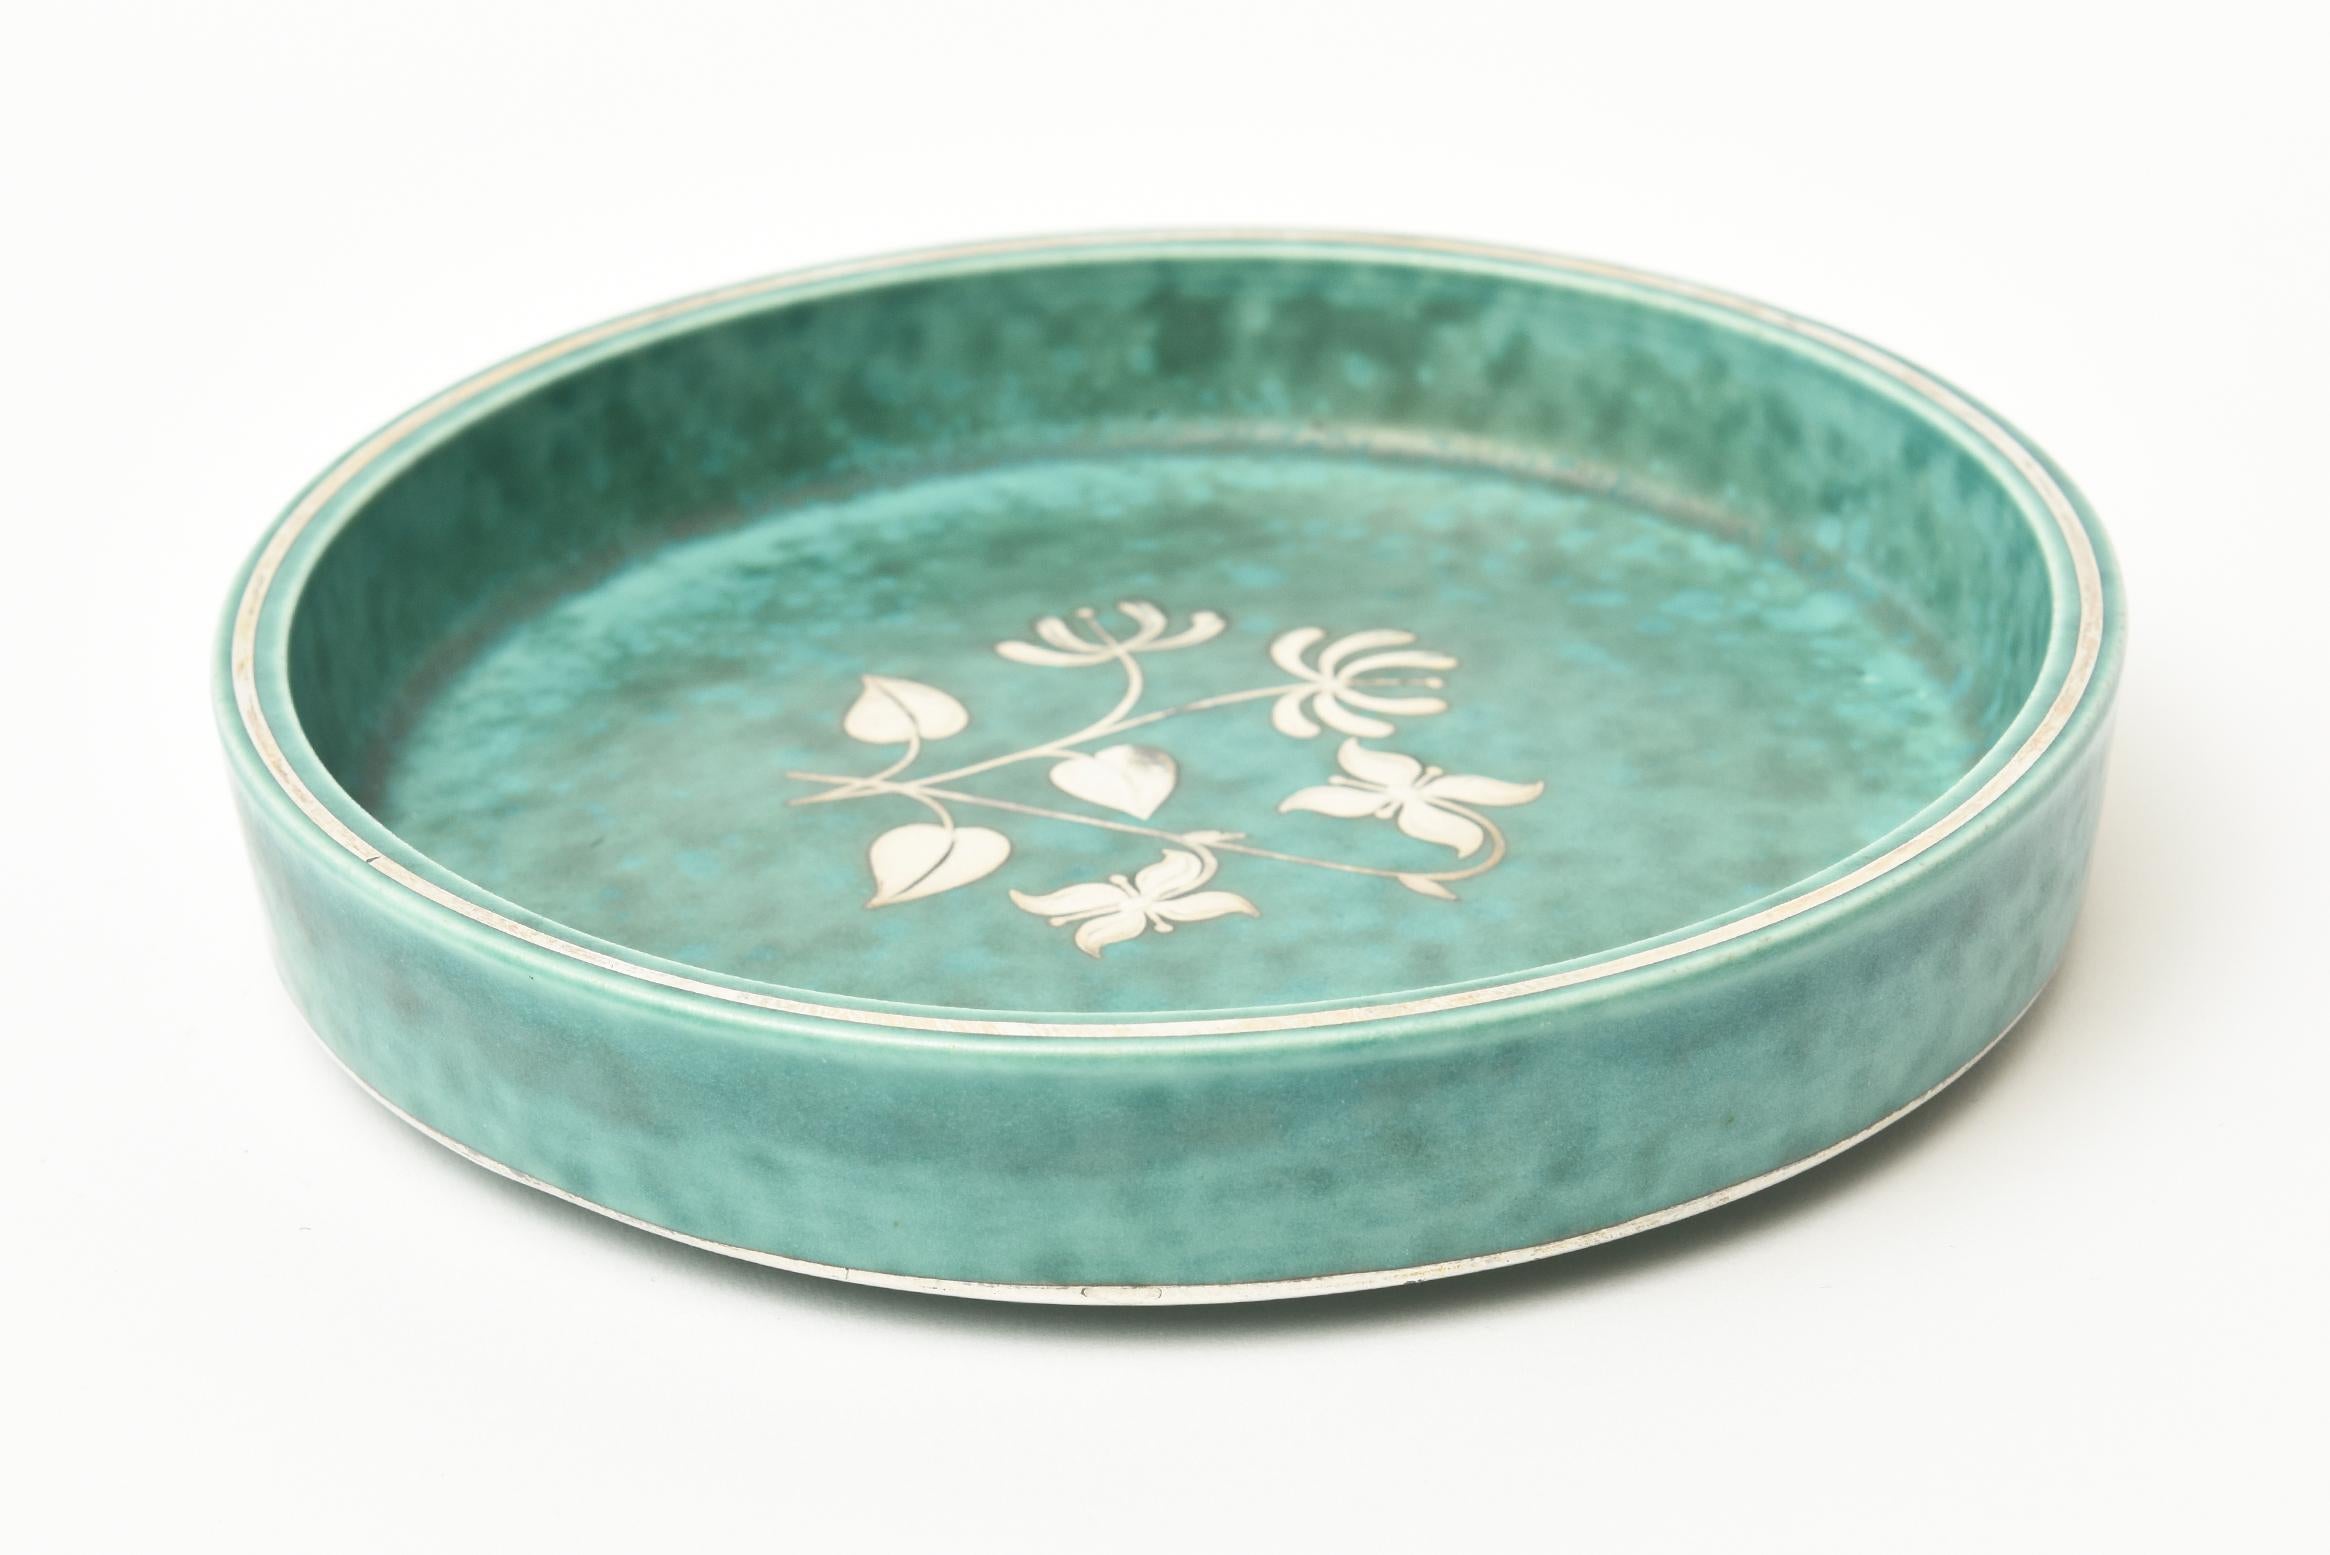 This lovely vintage Swedish Gustavsberg Argenta ceramic bowl or low dish has inlaid sterling silver overlay of formations of nature. Flower and leave depictions form the interior of the bowl. The infamous color of these ceramics are a turquoise